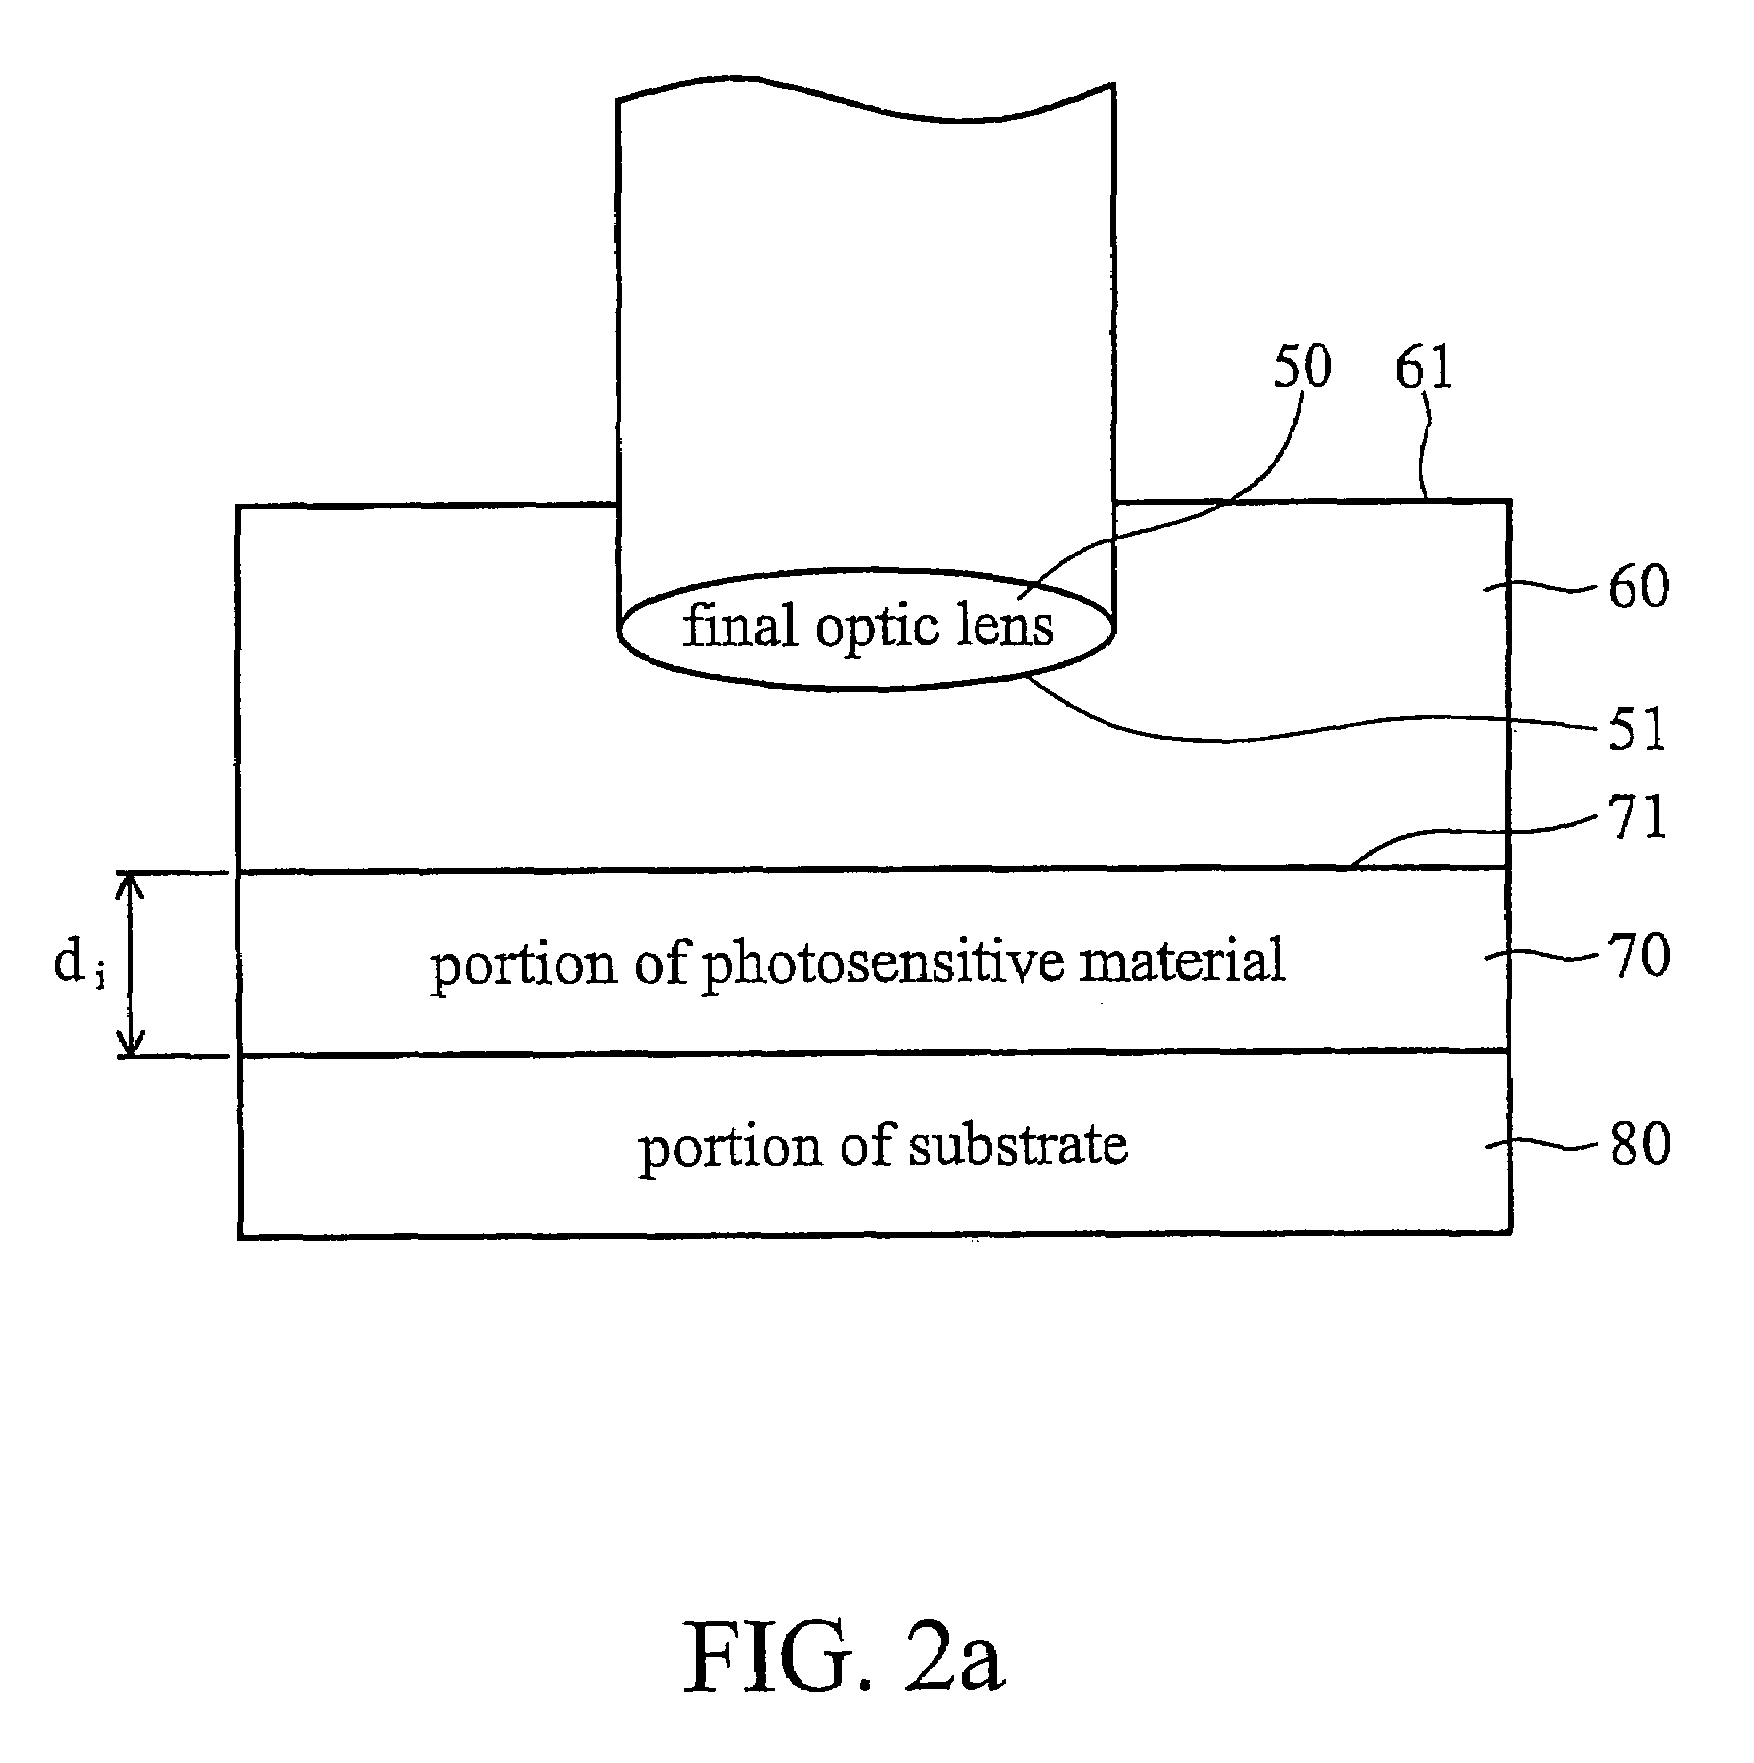 Lithography apparatus for manufacture of integrated circuits